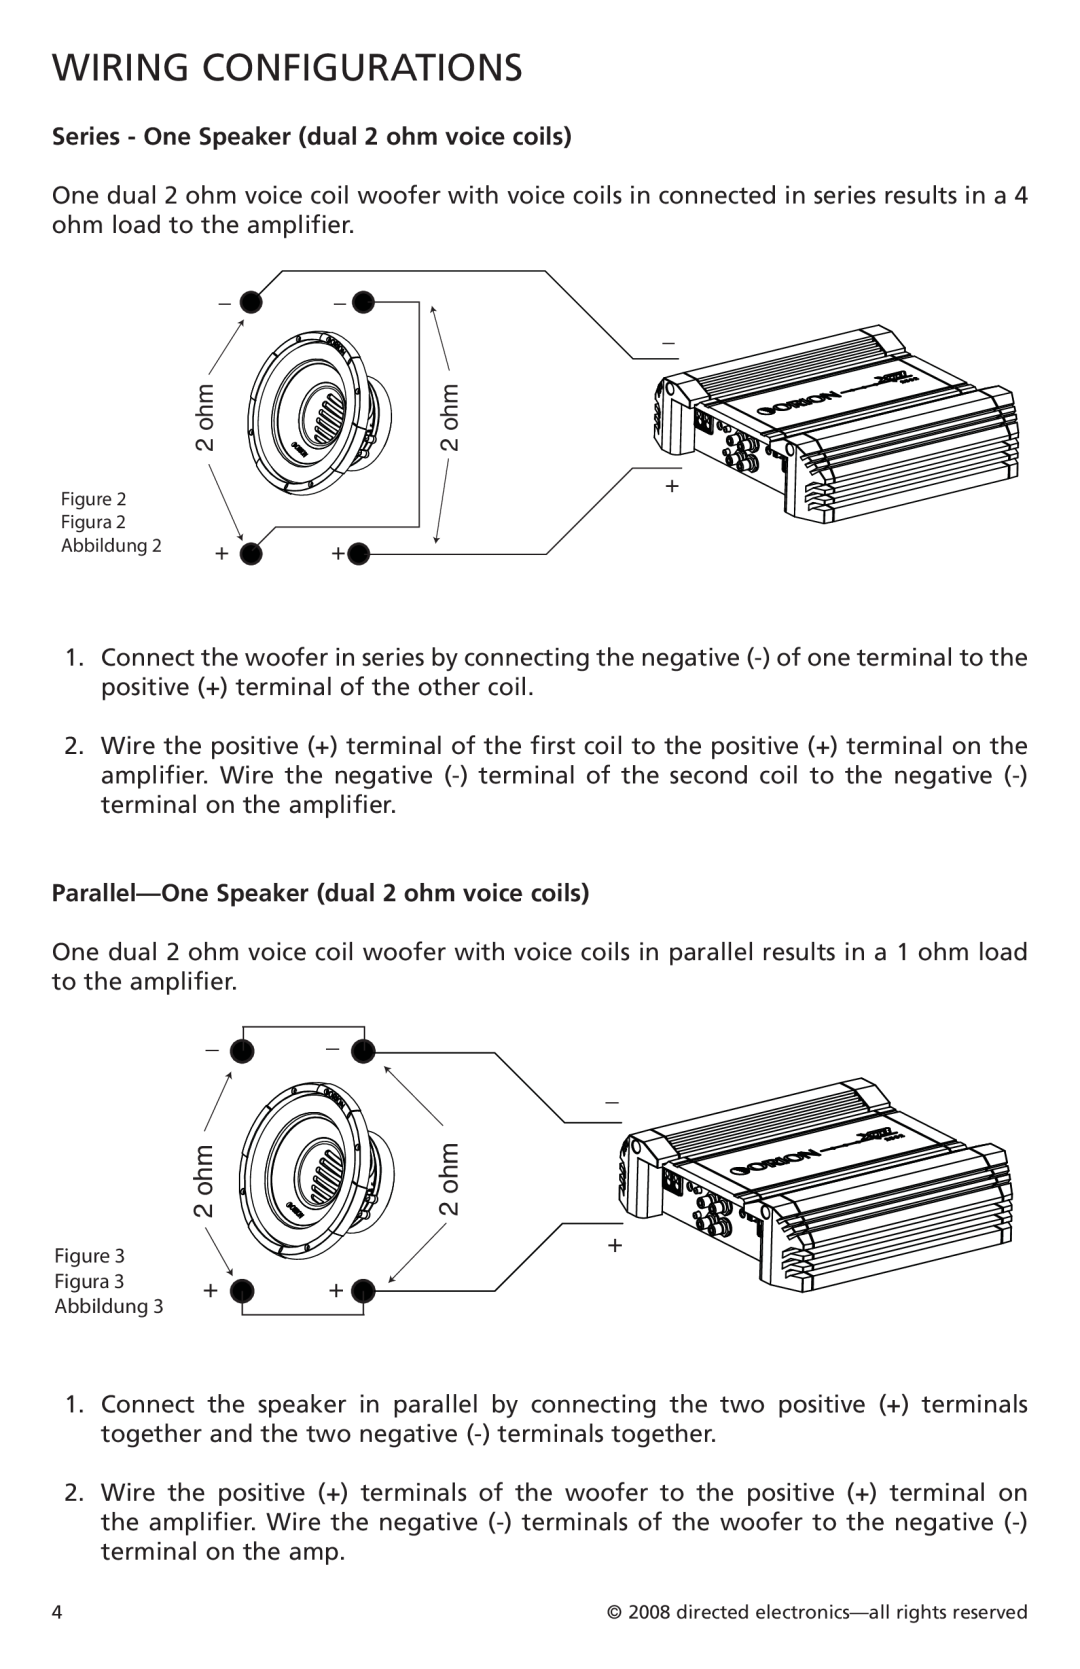 Orion Car Audio XTRPRO104, XTRPRO154, XTRPRO152, XTRPRO124, XTRPRO102, XTRPRO122 owner manual Wiring Configurations, 2 ohm 